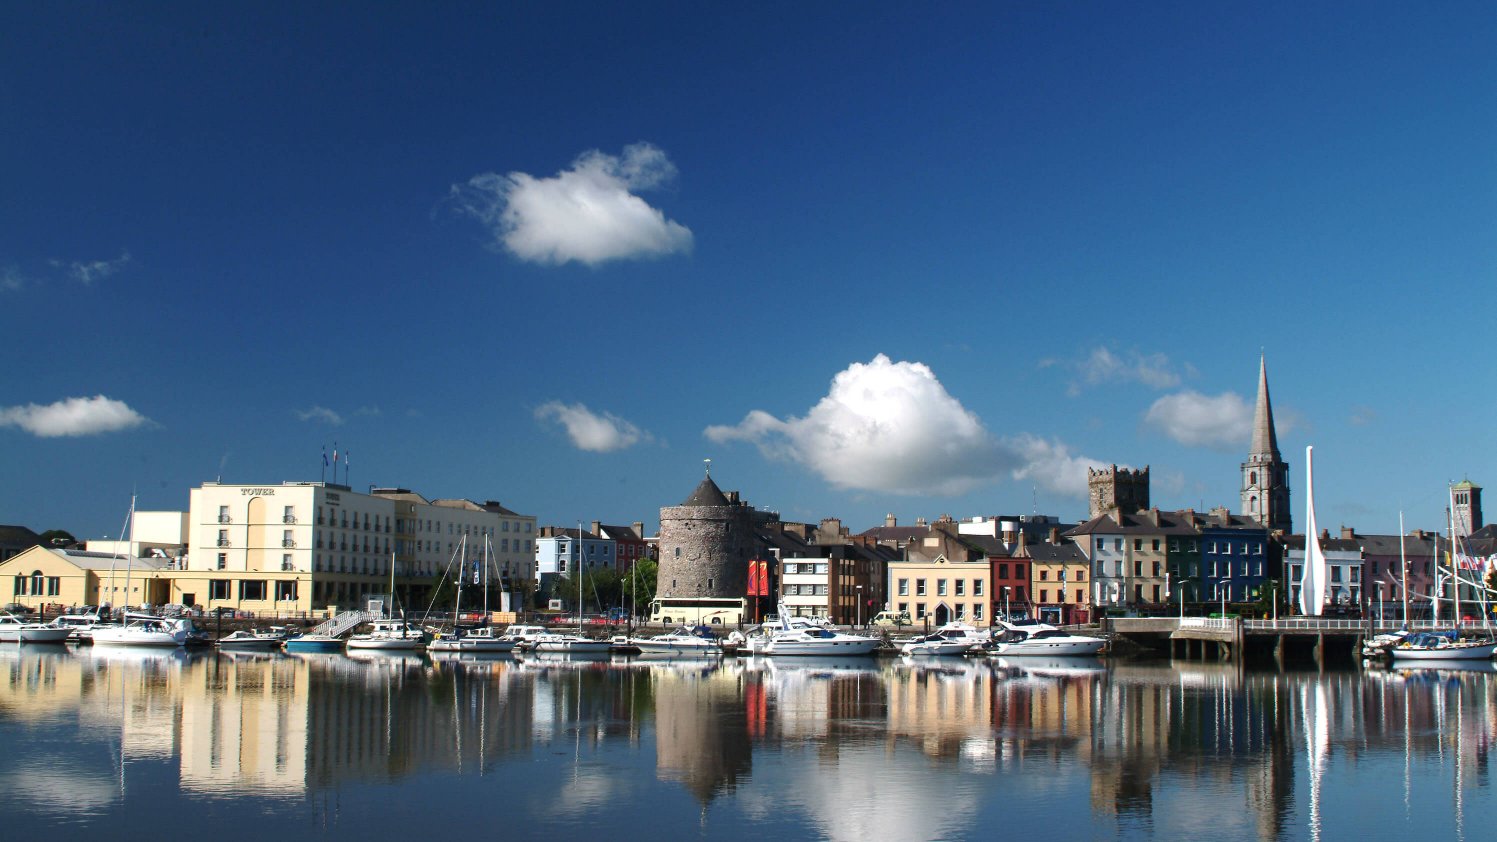 Waterford quays with reflection on the river